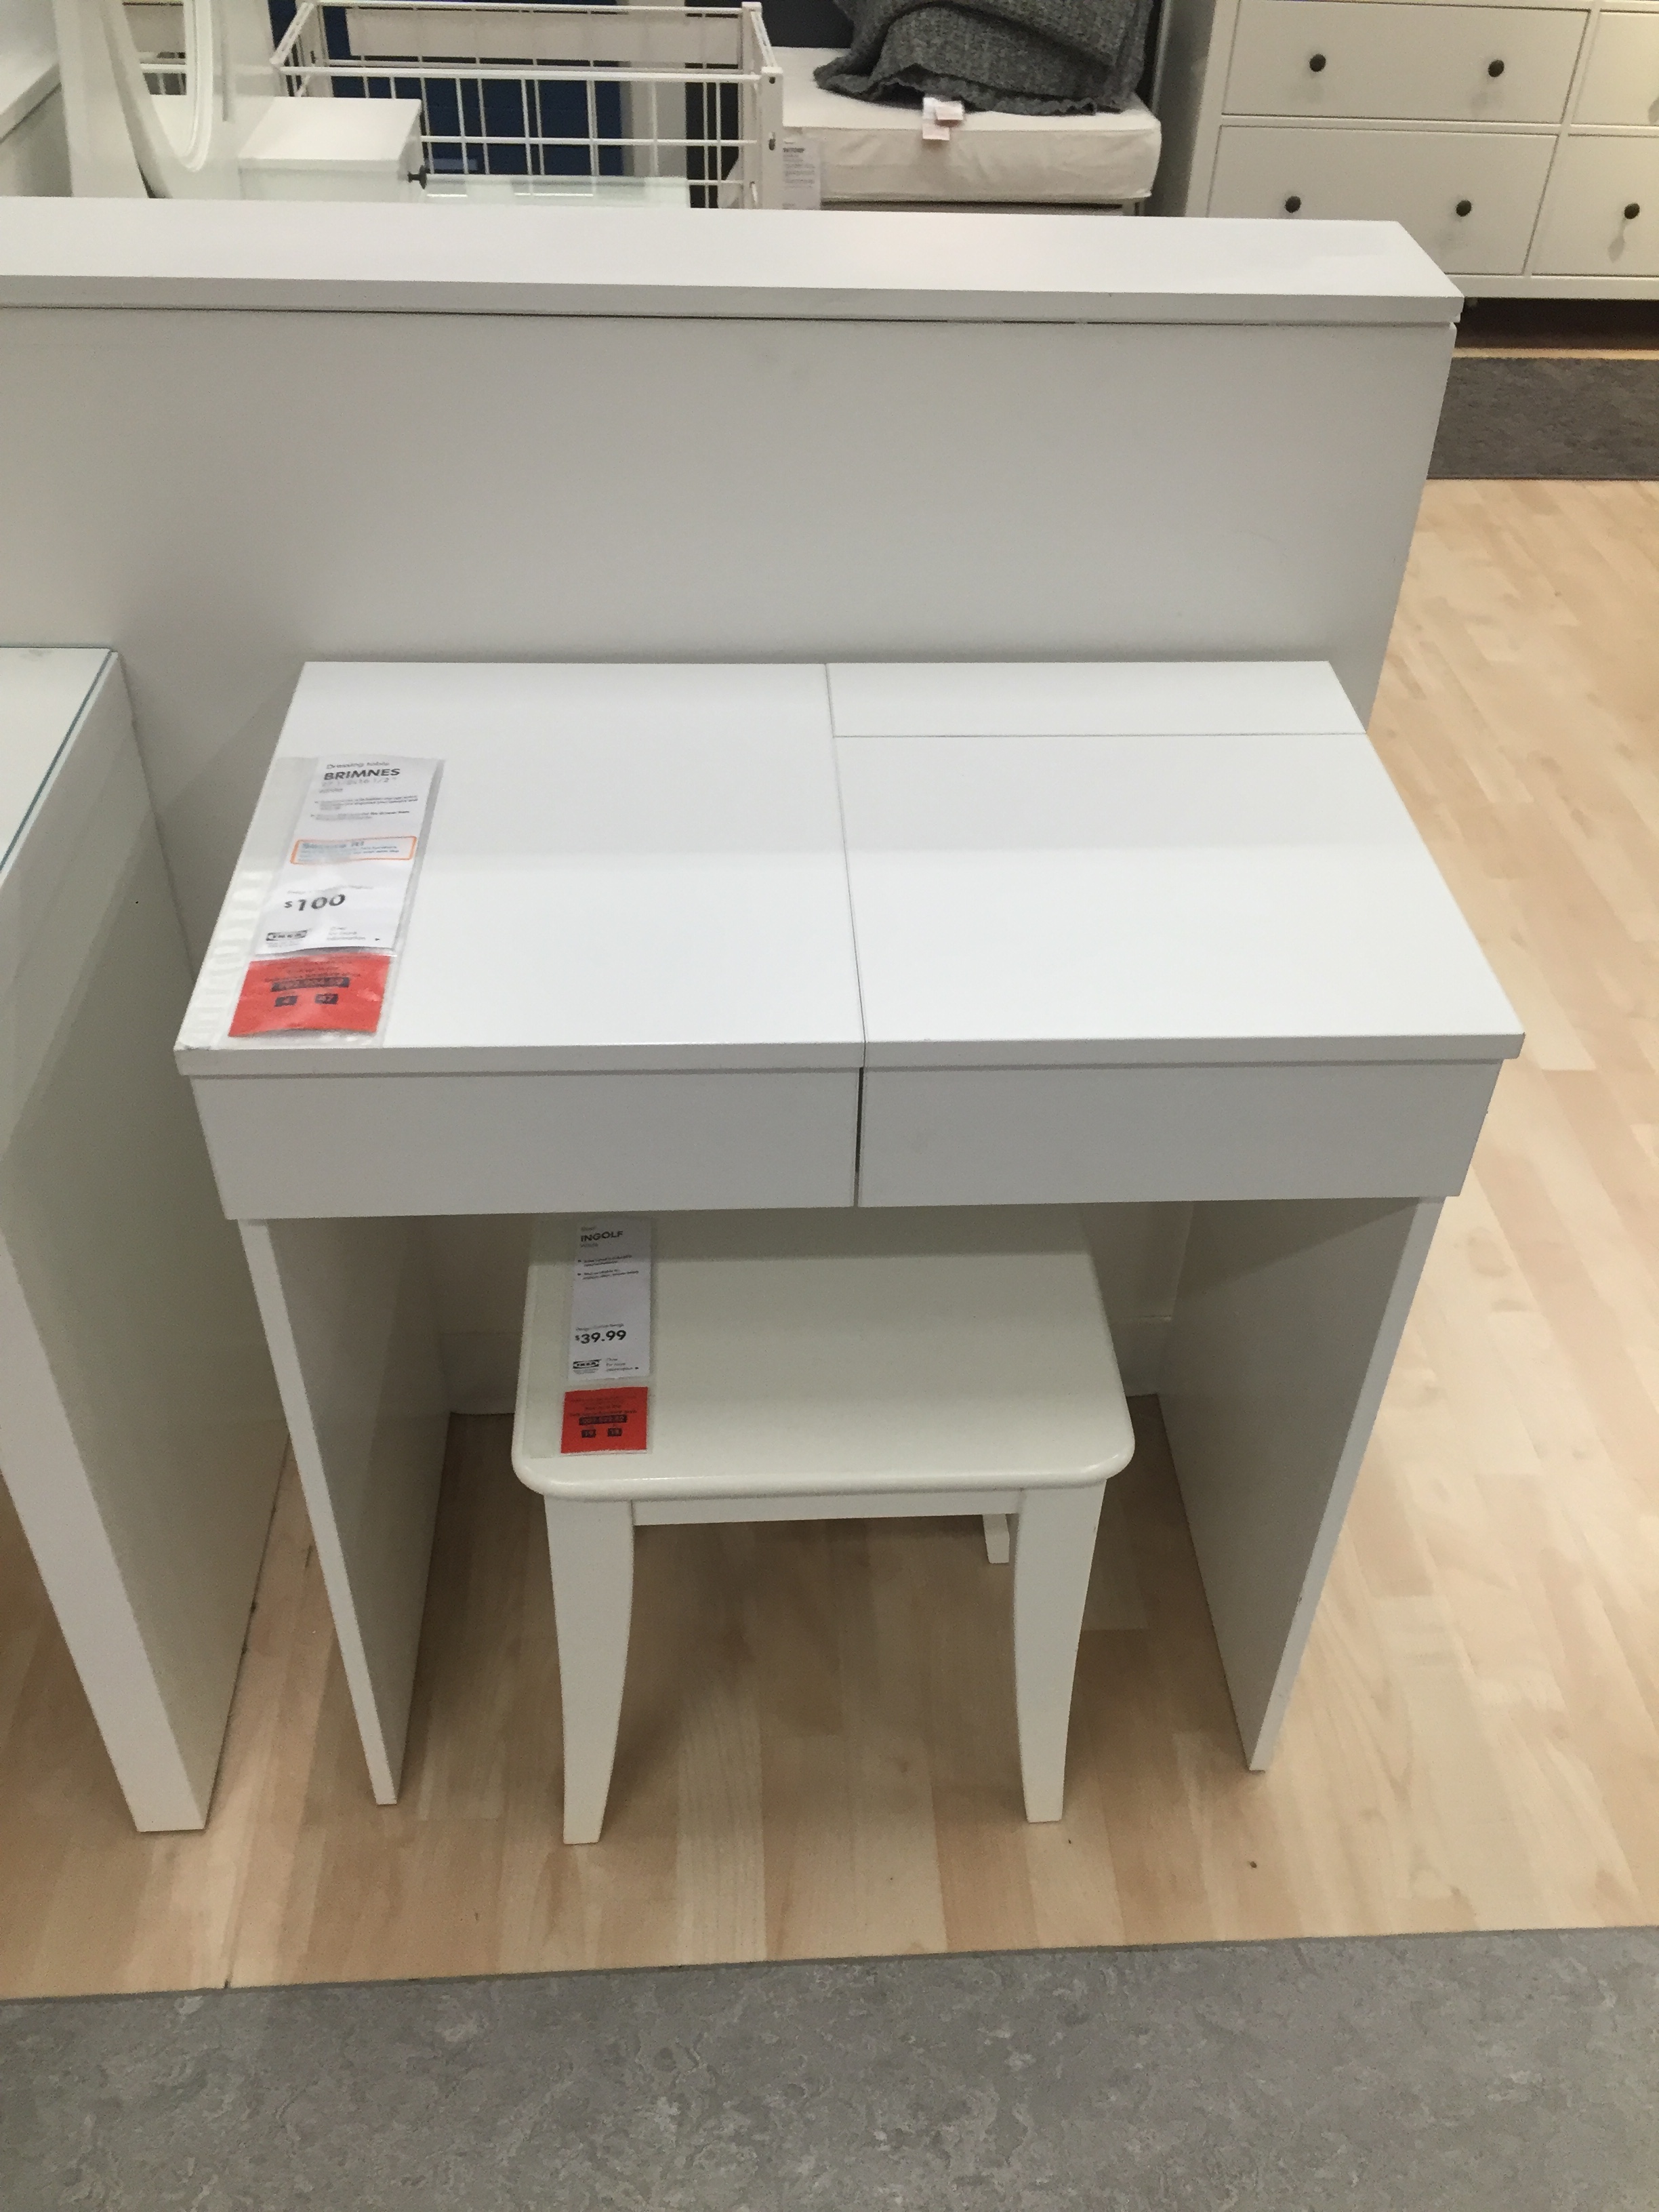 Try This Affordable Compact Desk For Kids